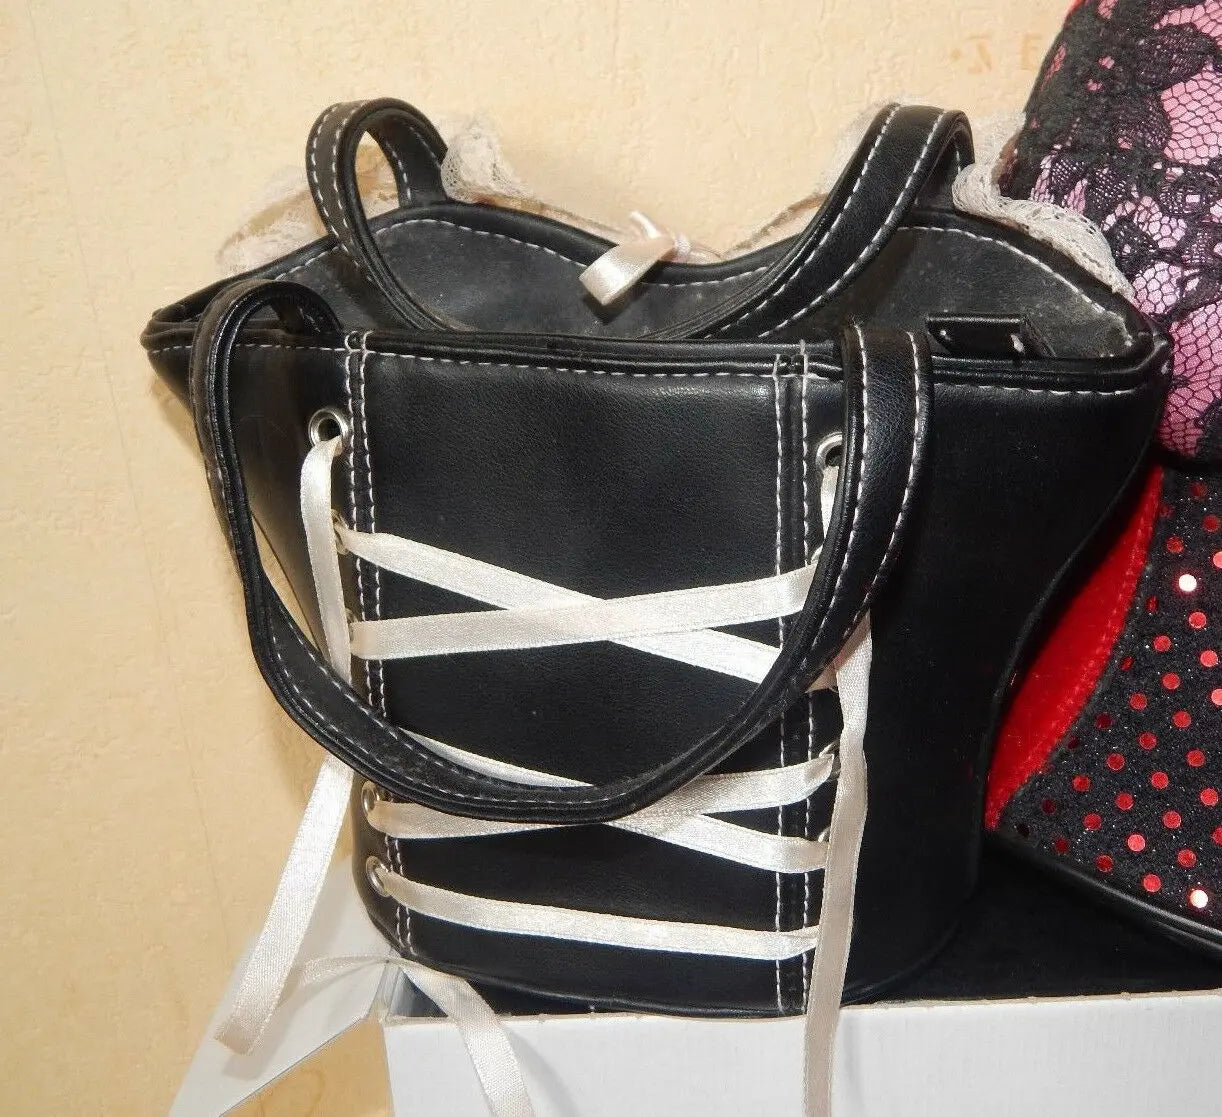 new BUSTIER STYLE HANDBAG-black ,pink lacy Ltd.Ed. 8"widex8"long.Whispers label whispers